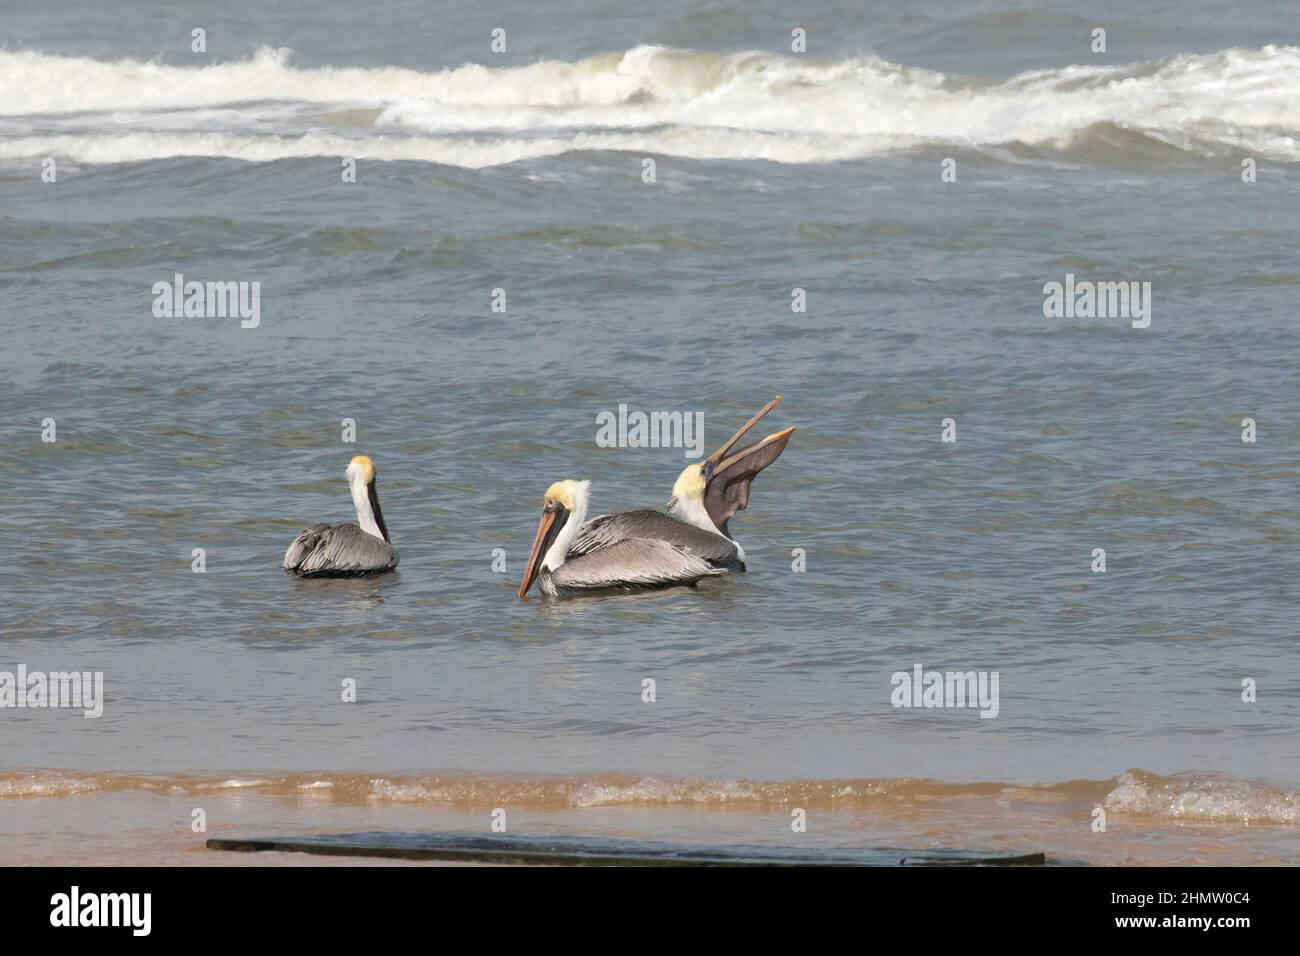 Three brown pelicans swimming on the ocean and one is swallowing a fish in Summerhaven, Florida. Stock Photo